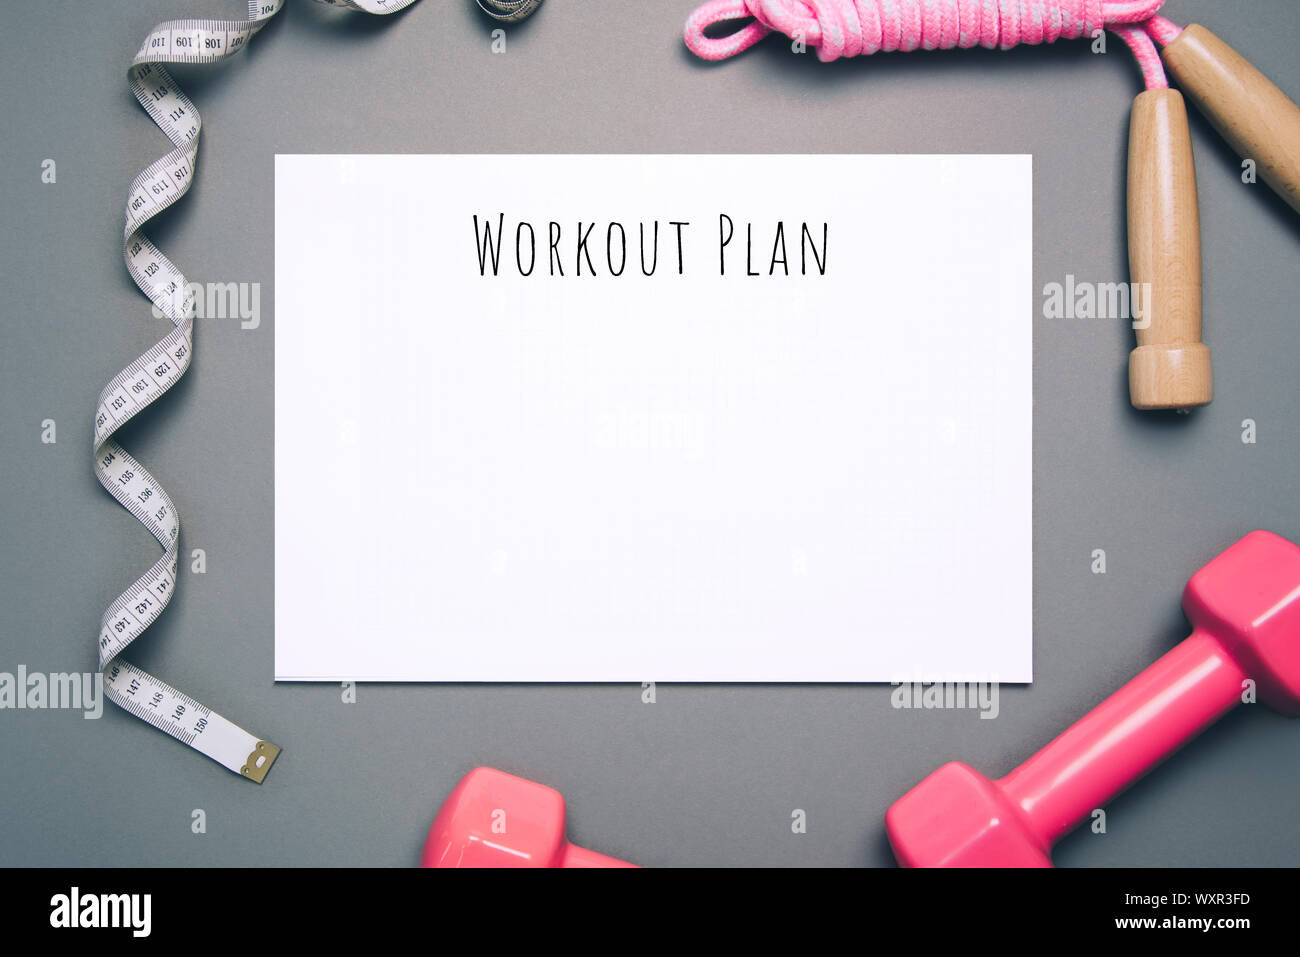 Flat lay shot of workout plan on gray background. Stock Photo